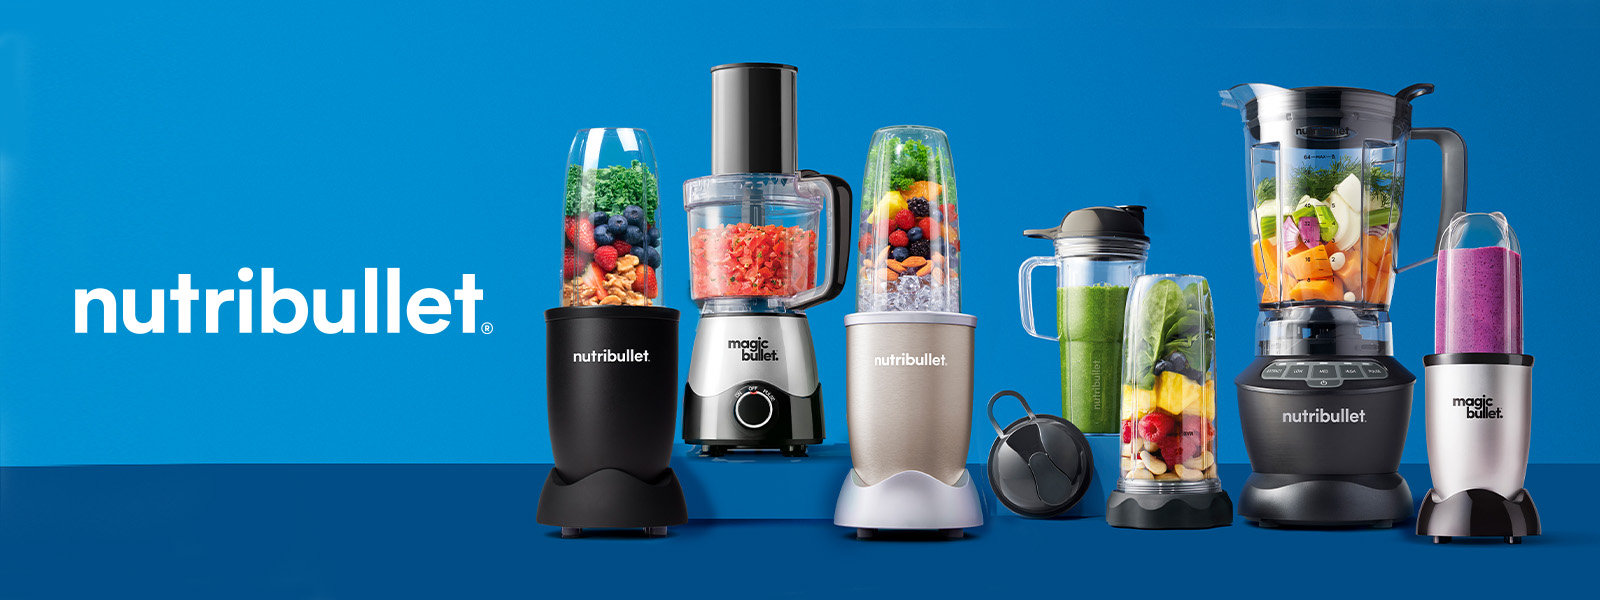 Instructional Cleanup Thoughts Pour Test On Nutribullet Go-How Smooth Is  the Nutriblast Results! 